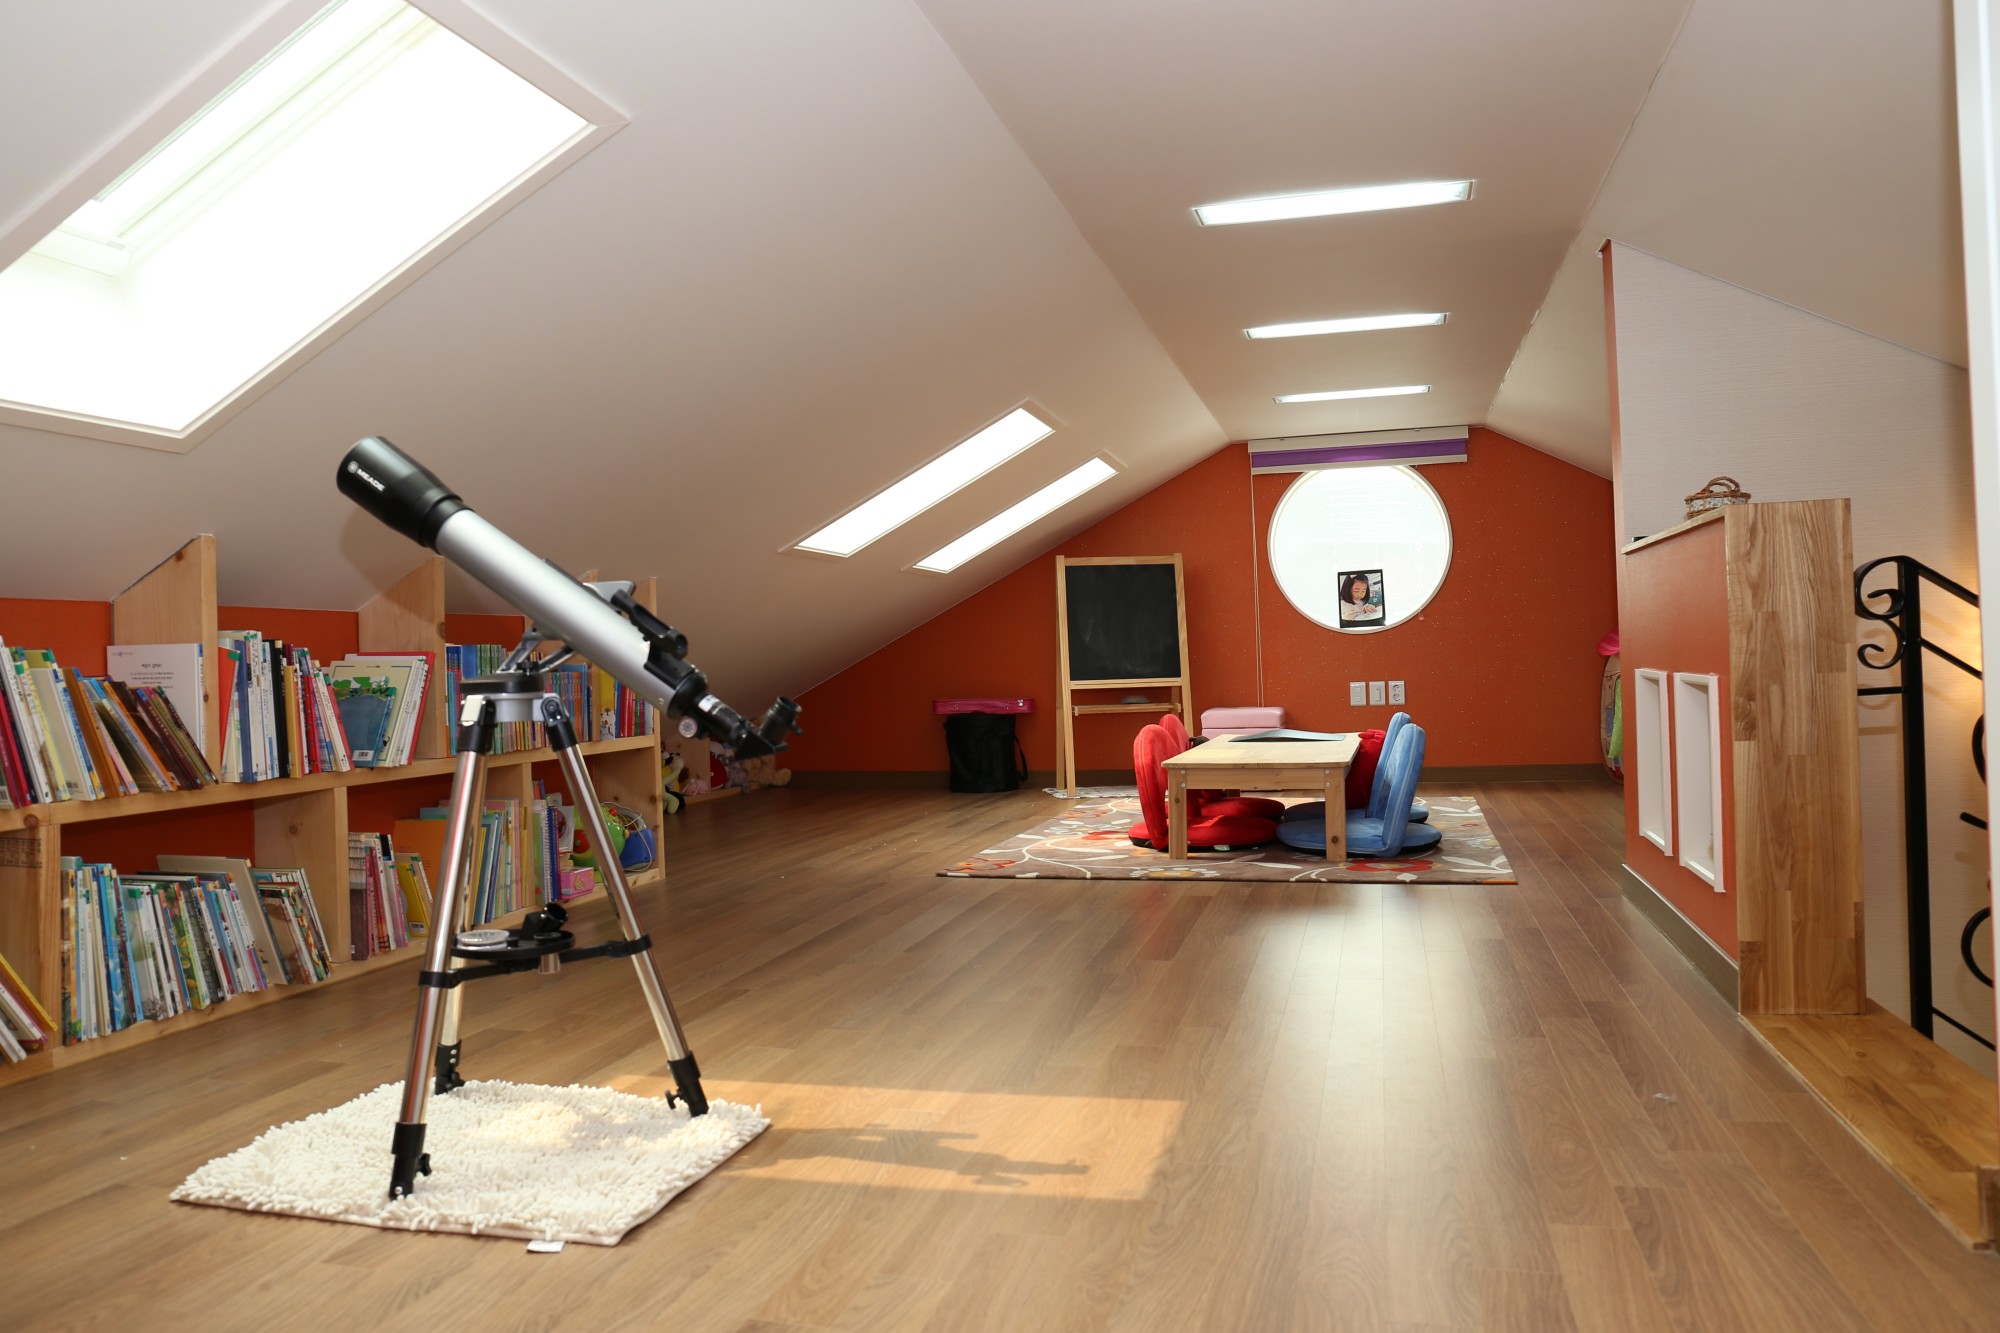 6 Attic Remodel Ideas: How to Make an Awkward Space Functional